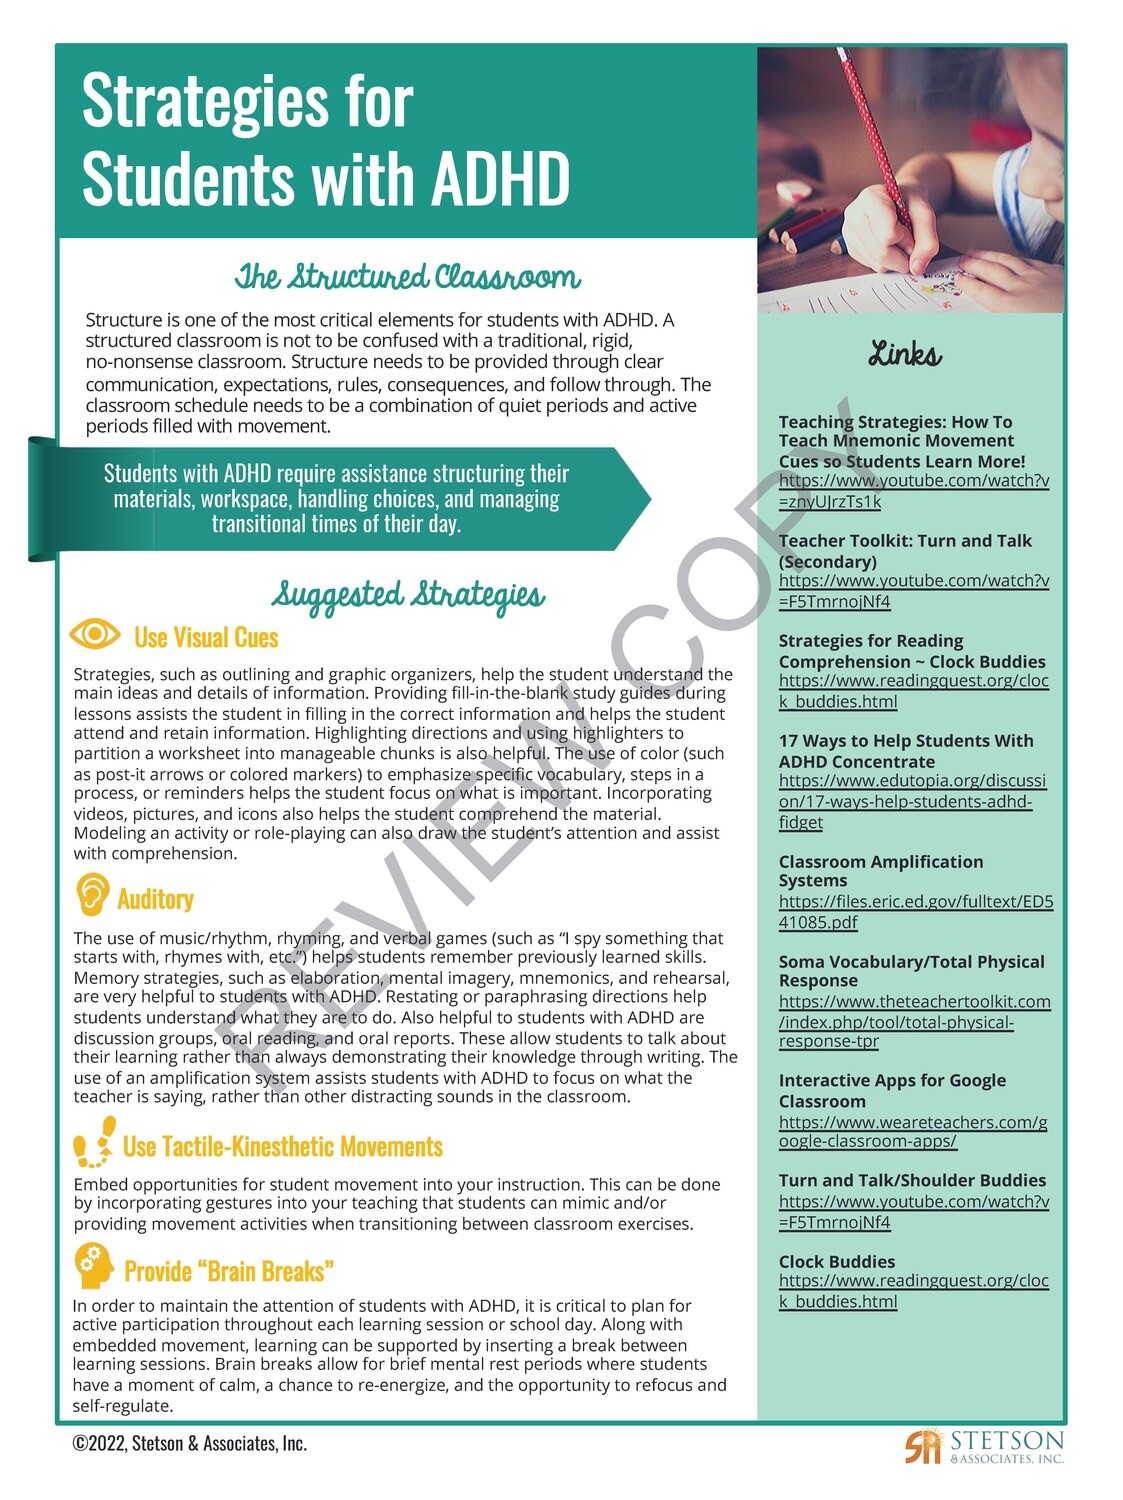 Strategies for Students with ADHD Information Card